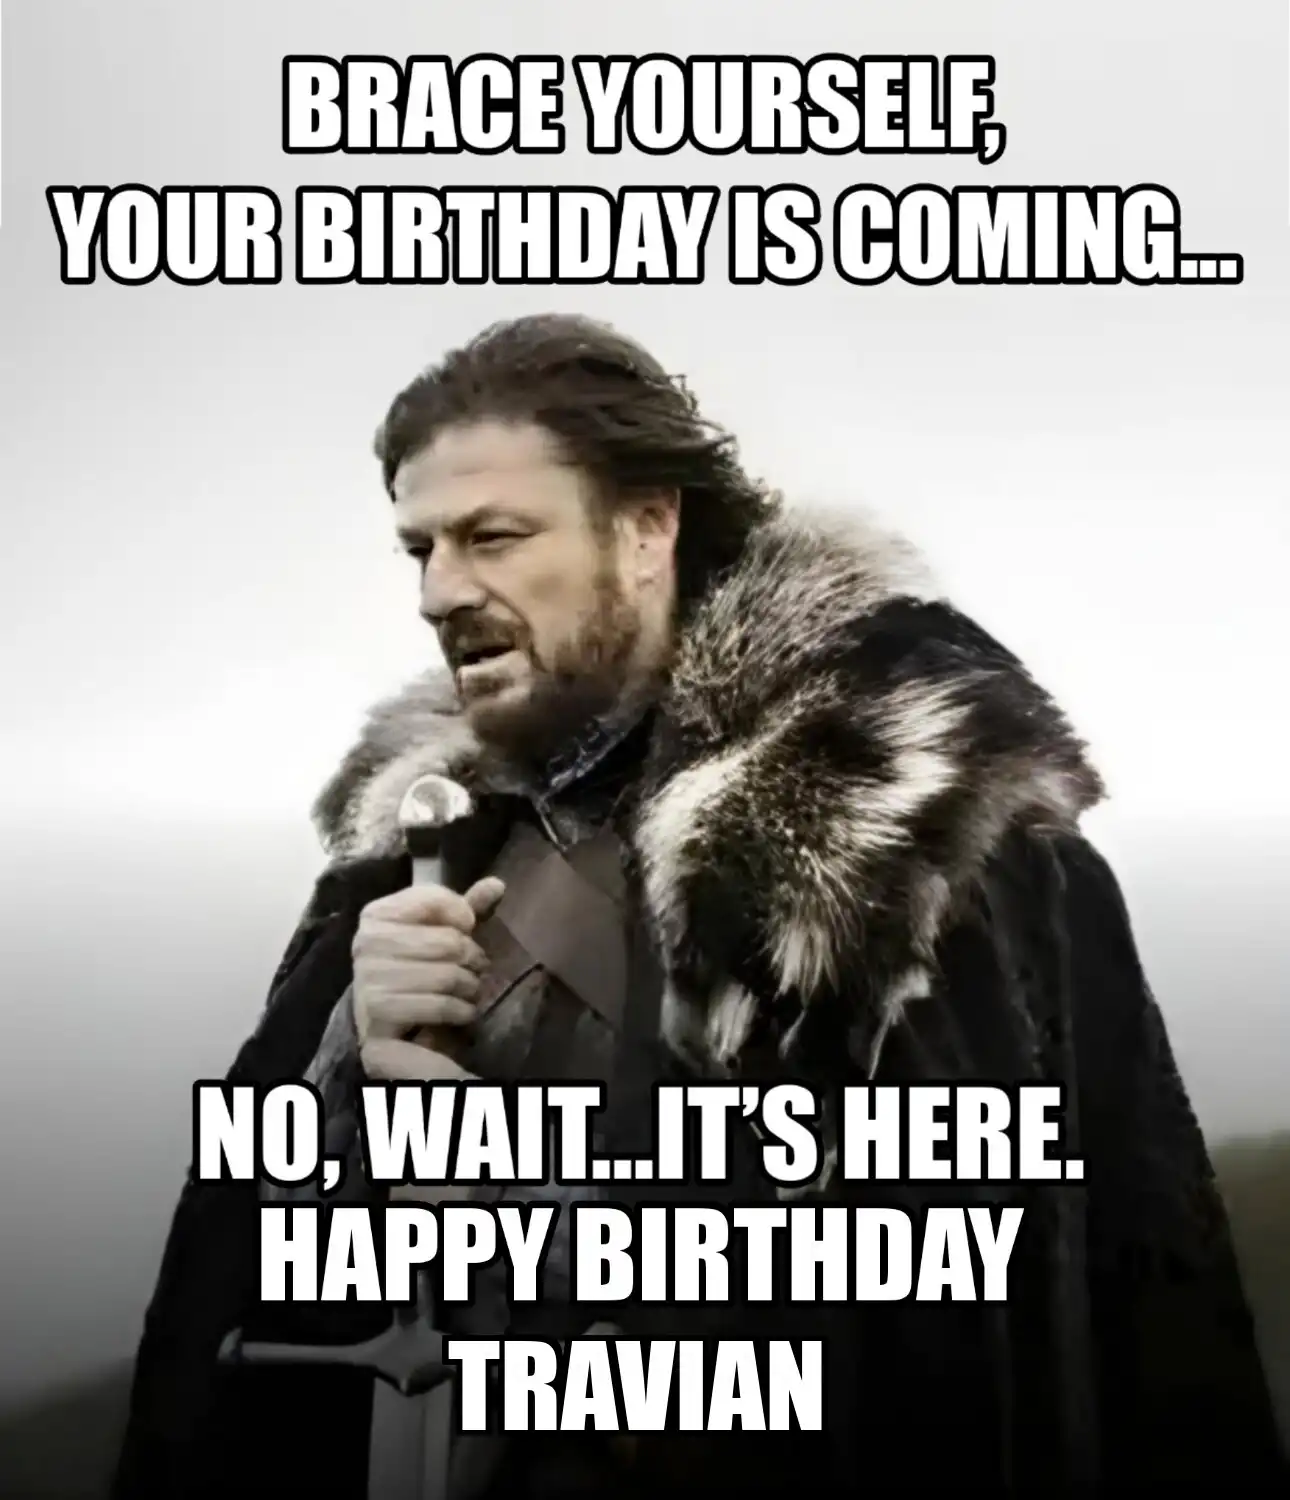 Happy Birthday Travian Brace Yourself Your Birthday Is Coming Meme